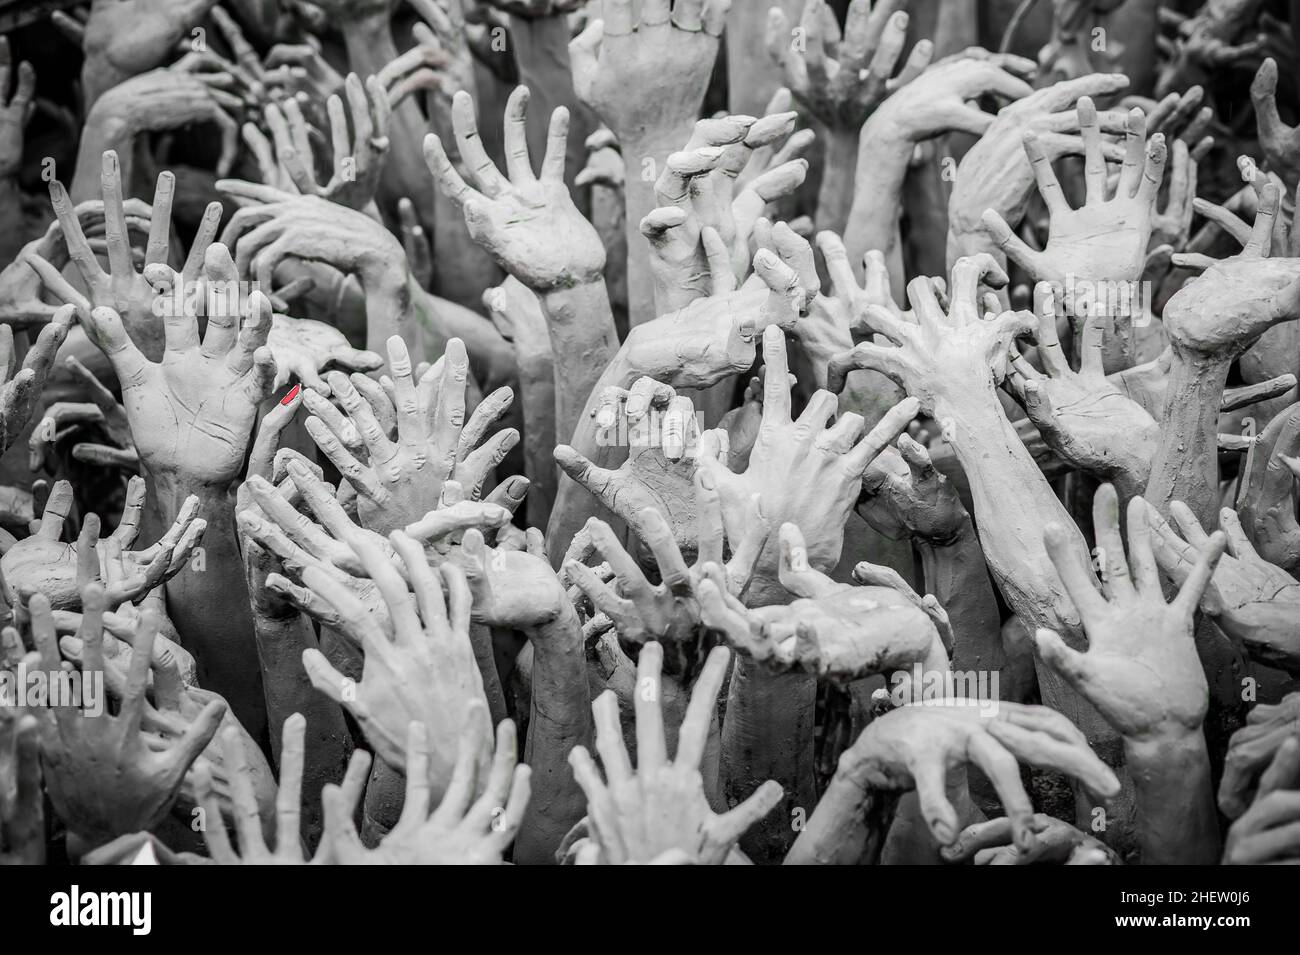 WAT RONG KHUN - WHITE TEMPLE, CHIANG RAI THAILAND - CIRCA MAY 2018. The sculpture of hundreds outreaching hands that symbolize unrestrained desire. Stock Photo